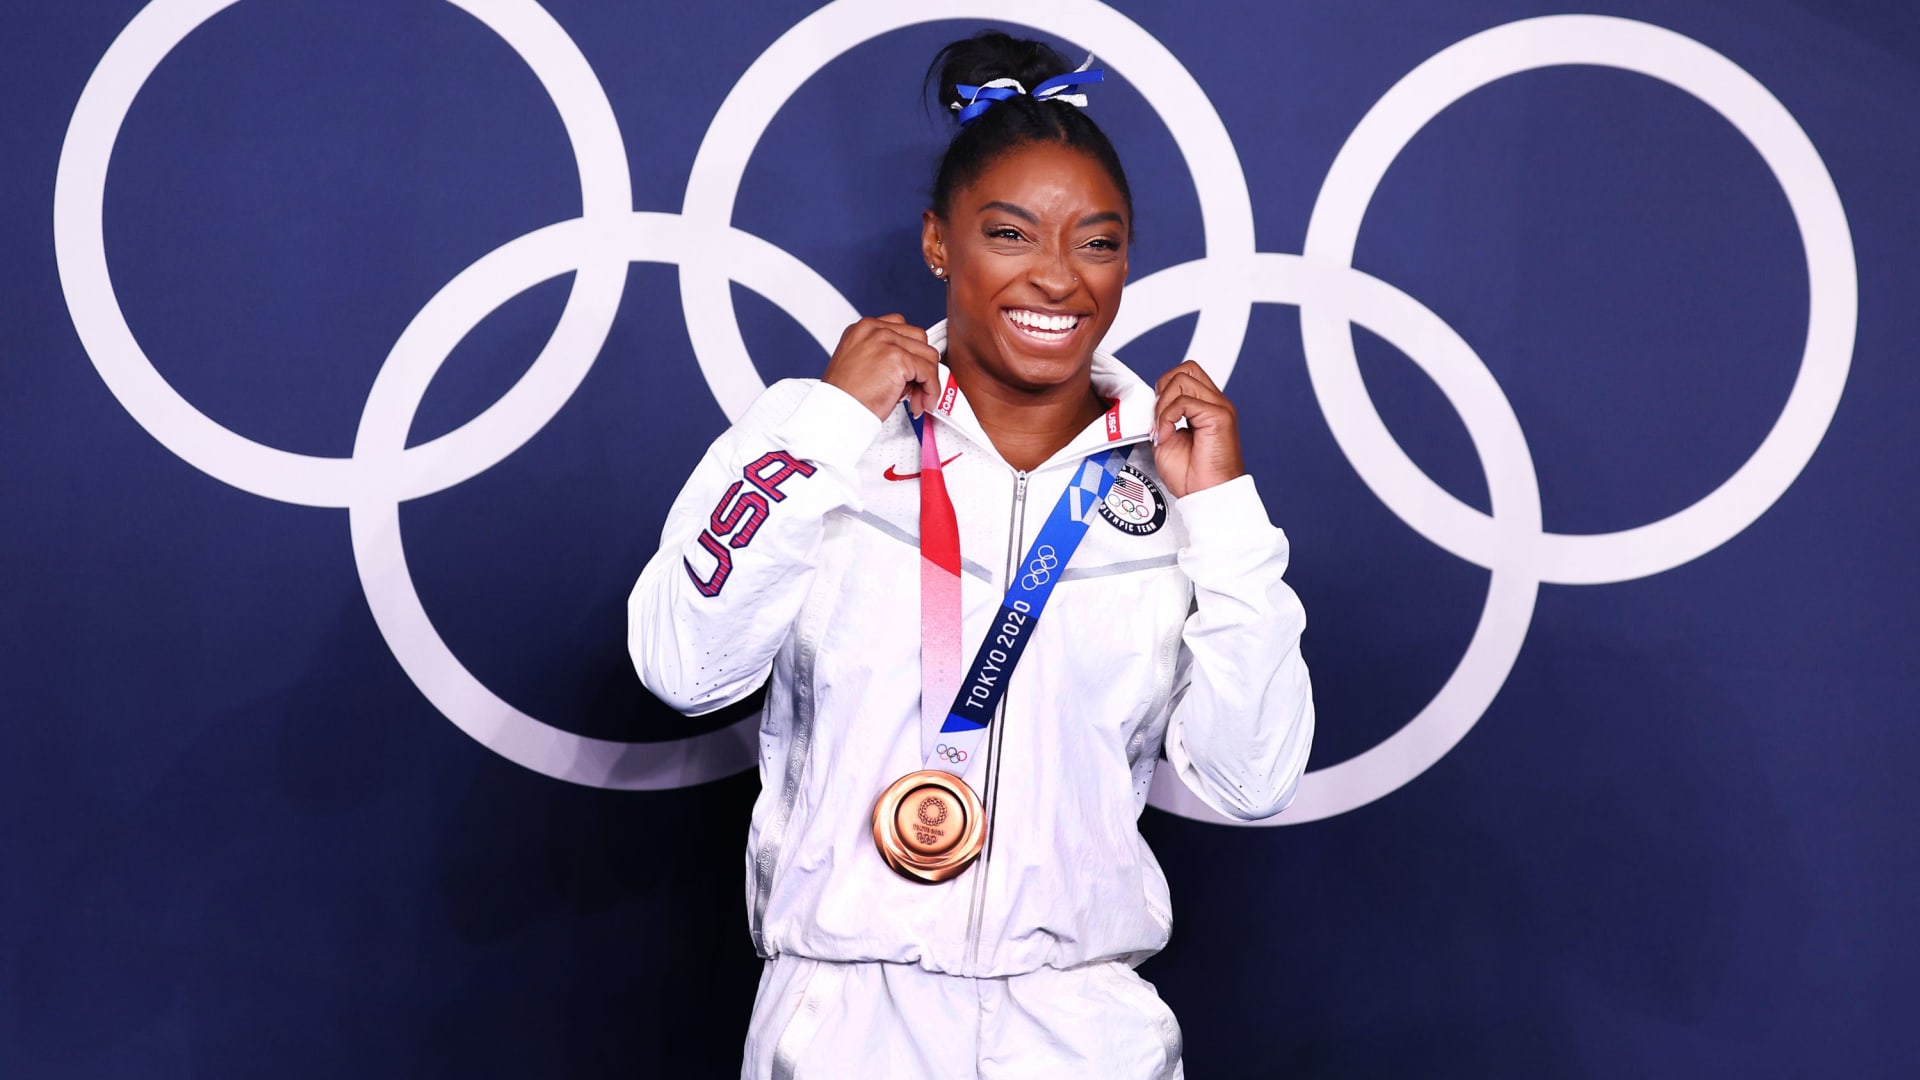 Bronze medallist Simone Biles of the United States poses in front of the Olympic rings at the Tokyo 2020 Olympics, Women's Beam Medal Ceremony, Ariake Gymnastics Centre, Tokyo, Japan, August 3, 2021.